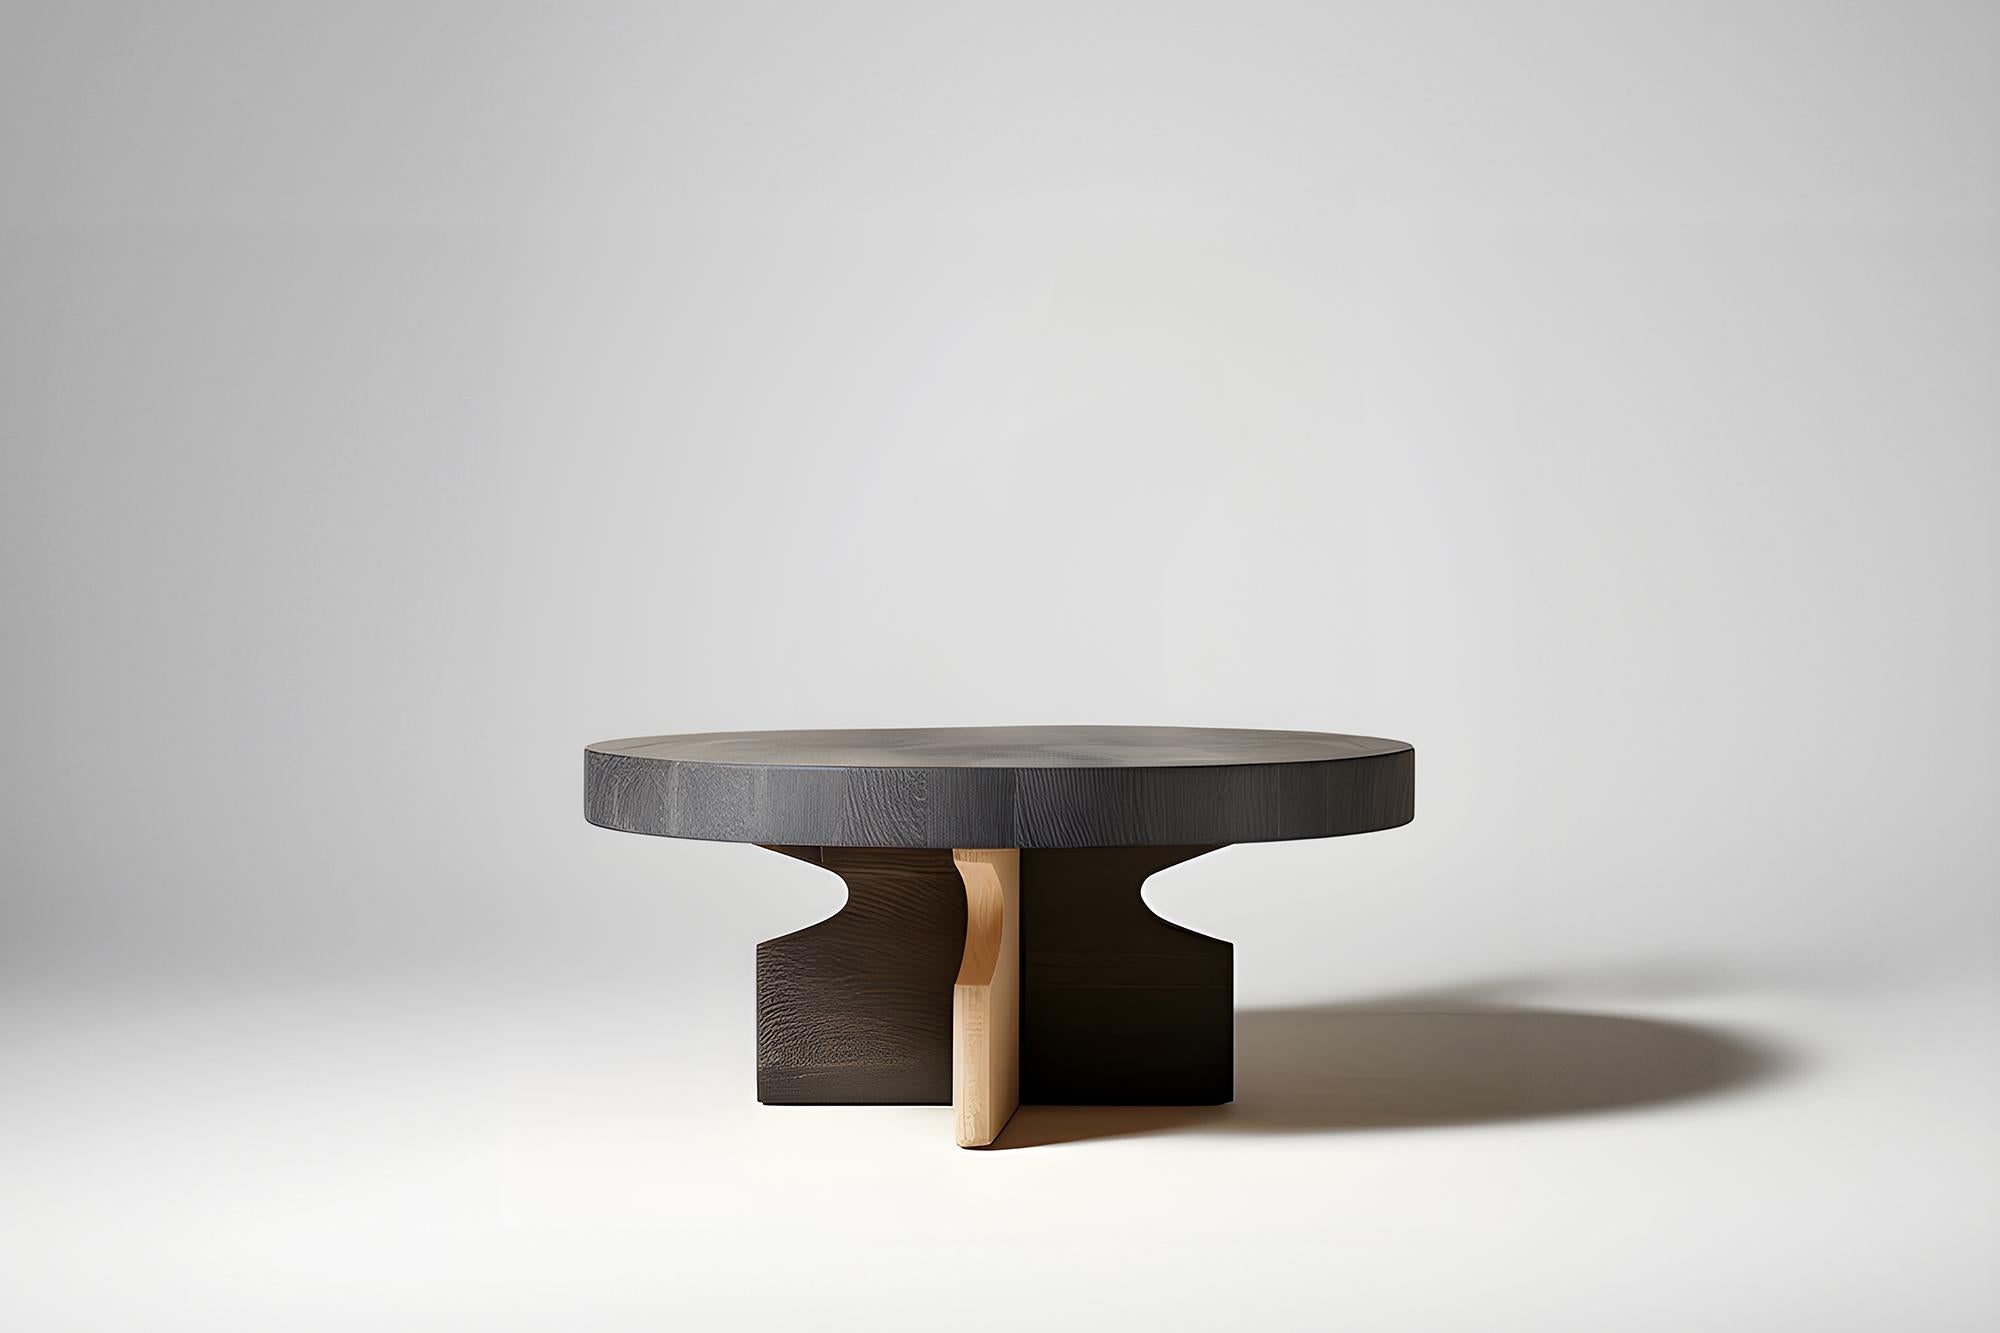 Geometric Round Top Fundamenta 65 Chic Design, Oak Finish by NONO

Sculptural coffee table made of solid wood with a natural water-based or black tinted finish. Due to the nature of the production process, each piece may vary in grain, texture,